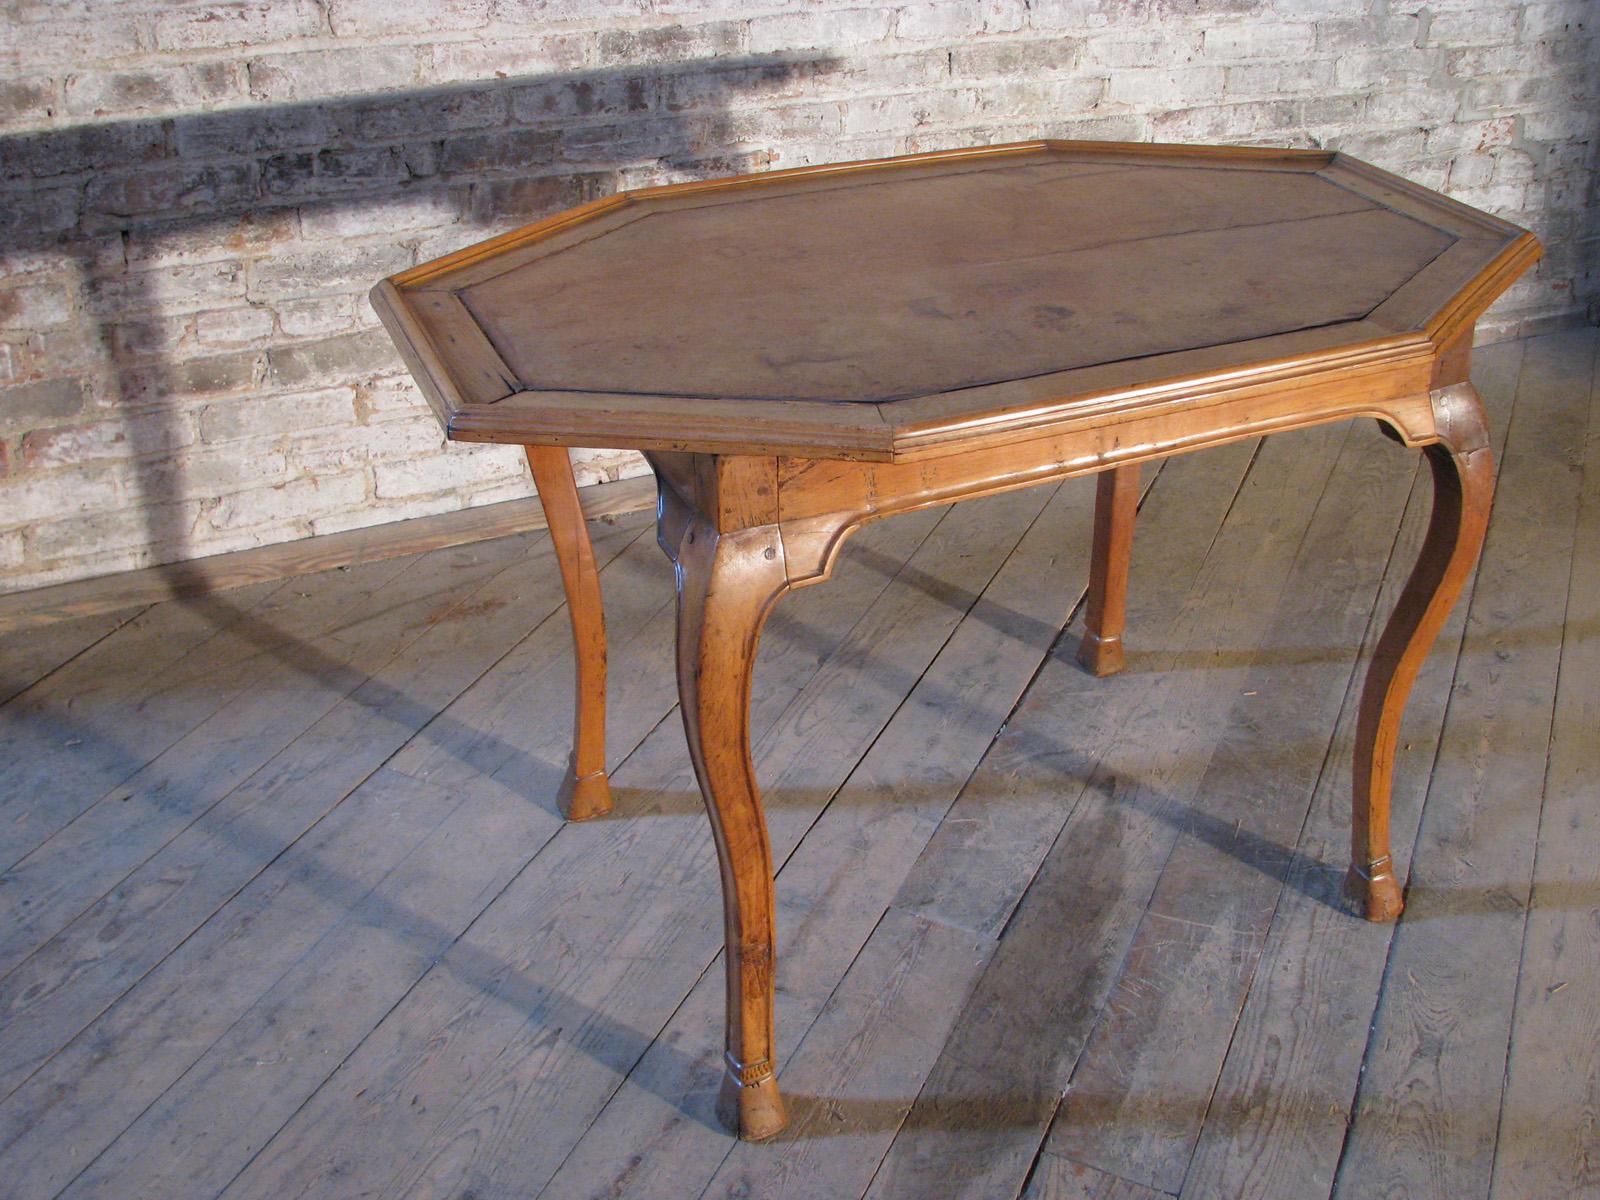 Italian Baroque 18th Century Octagonal Fruit Wood and Leather inset Center Table For Sale 2